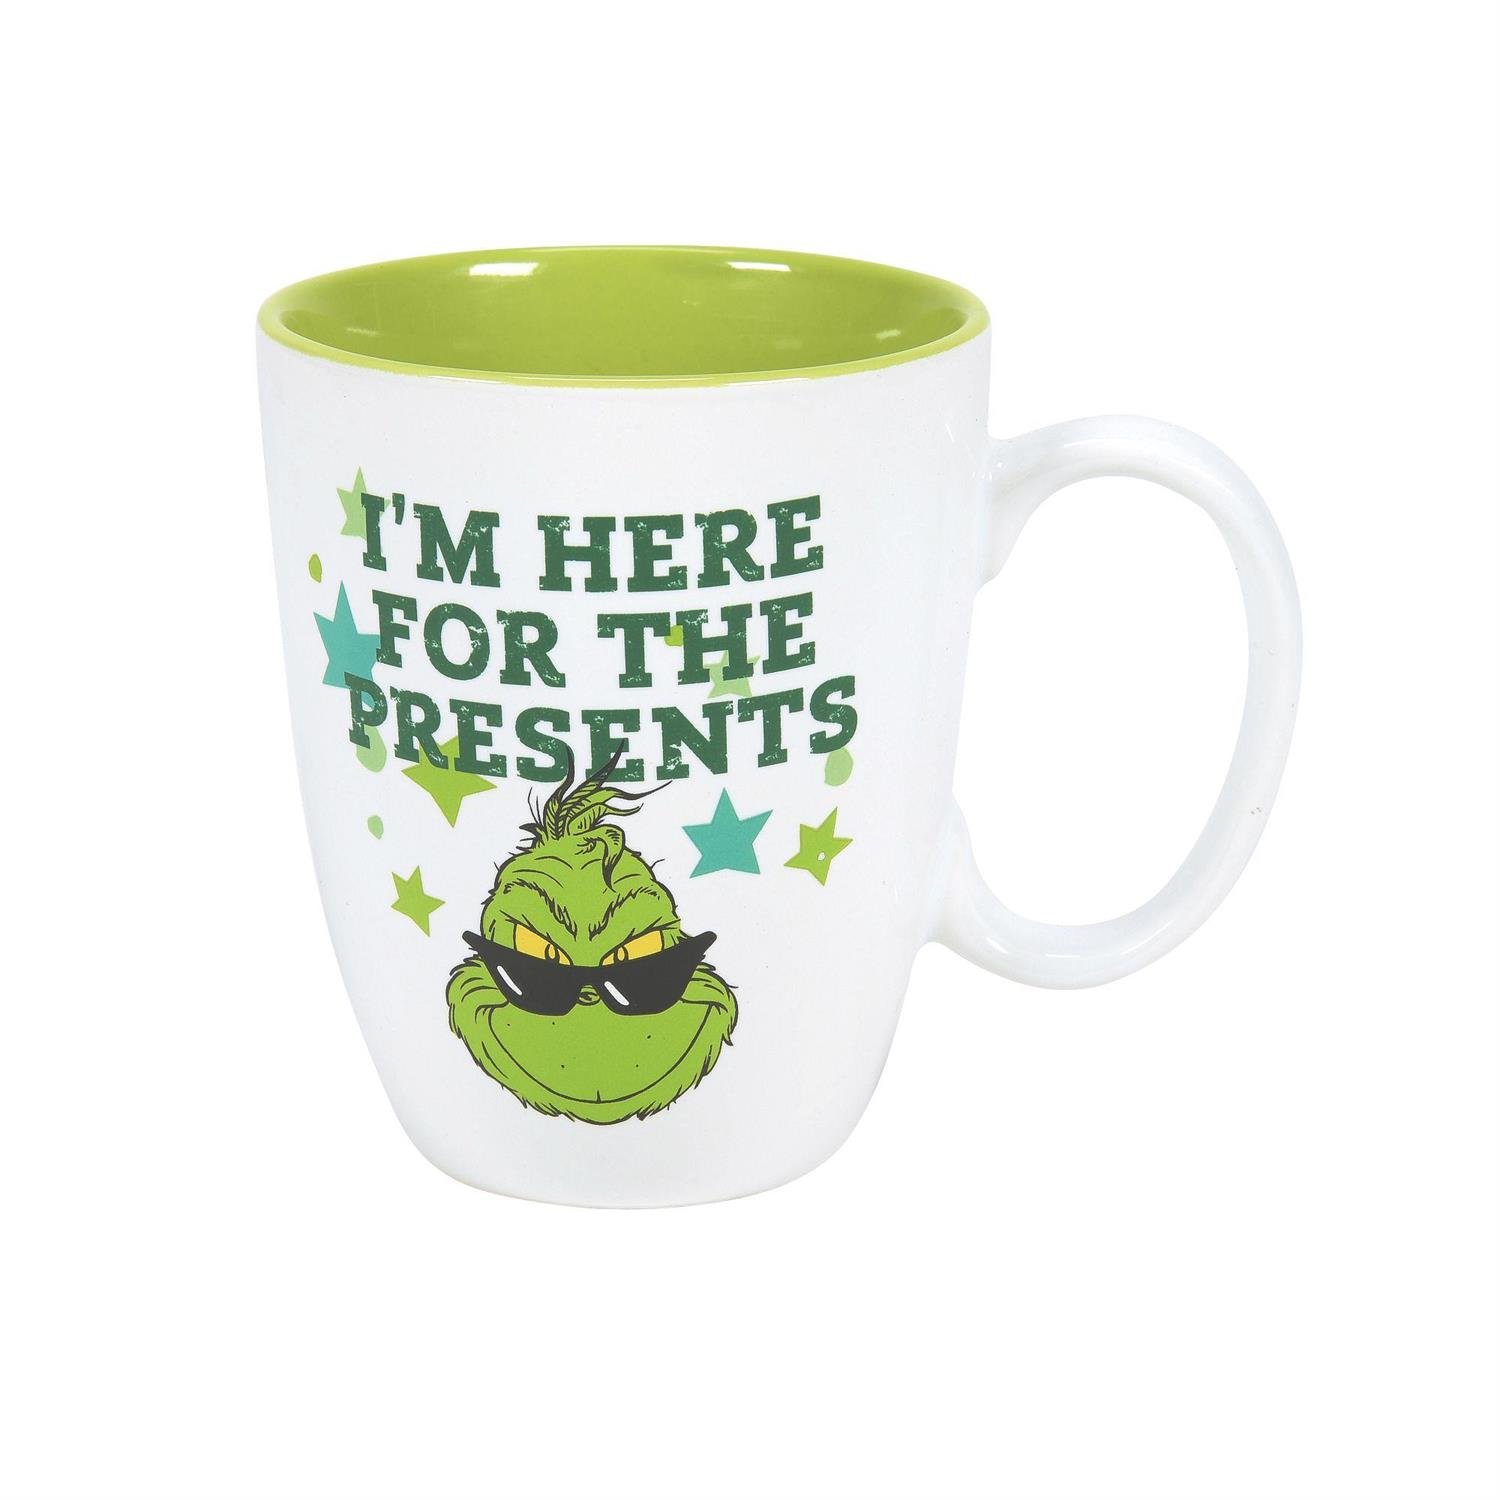 Here for the Presents Mug